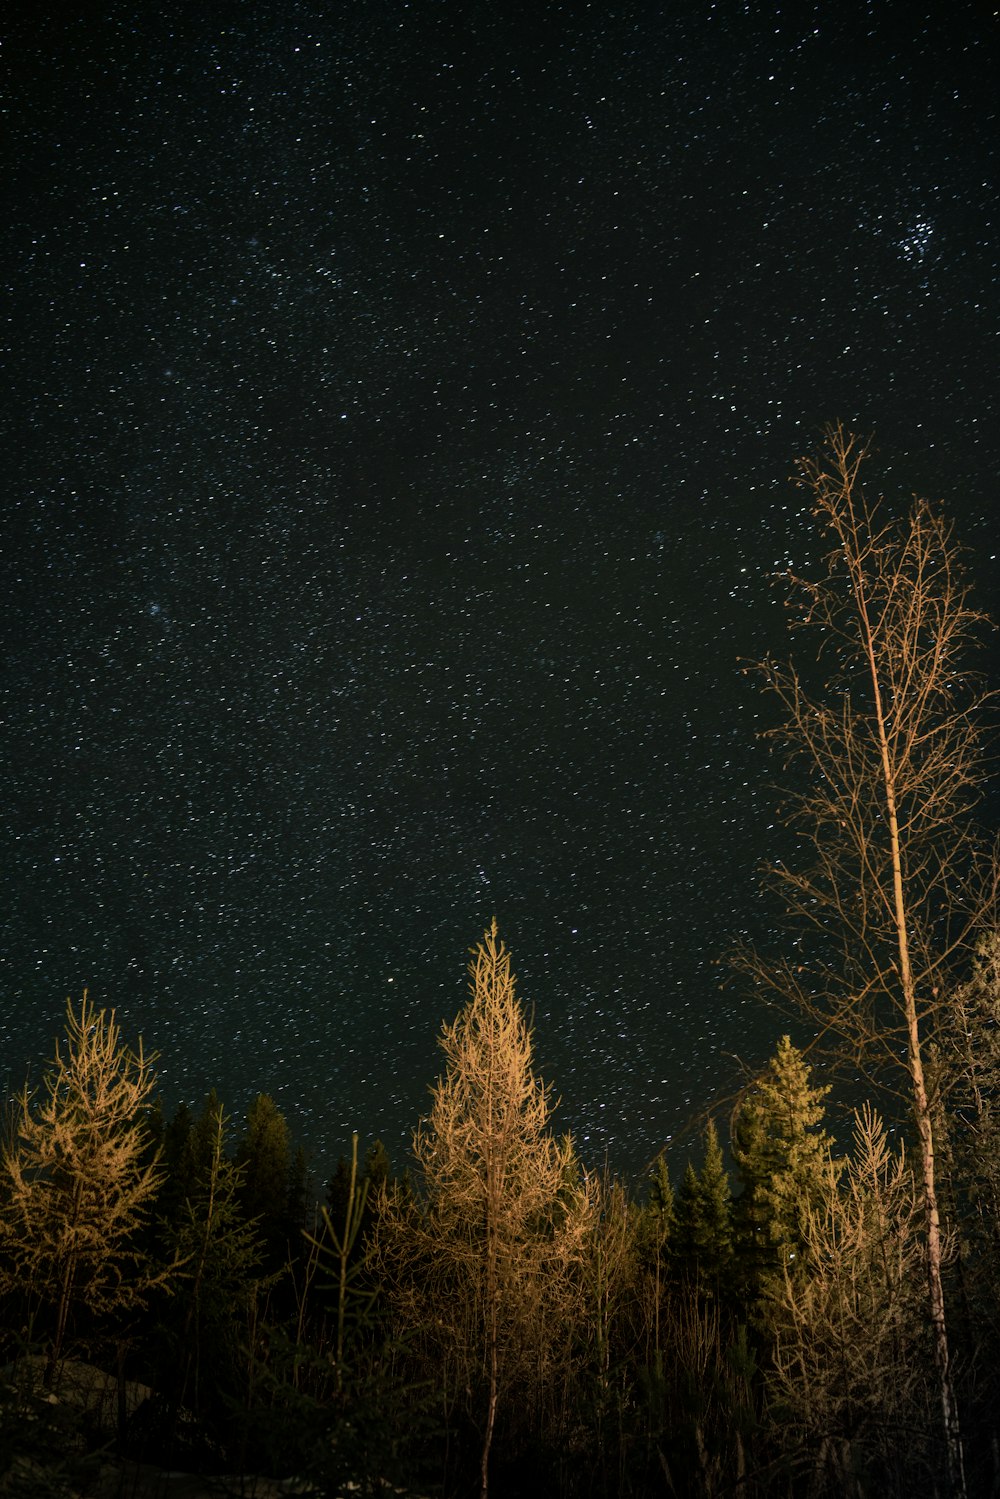 green leafed trees under sky with stars at night